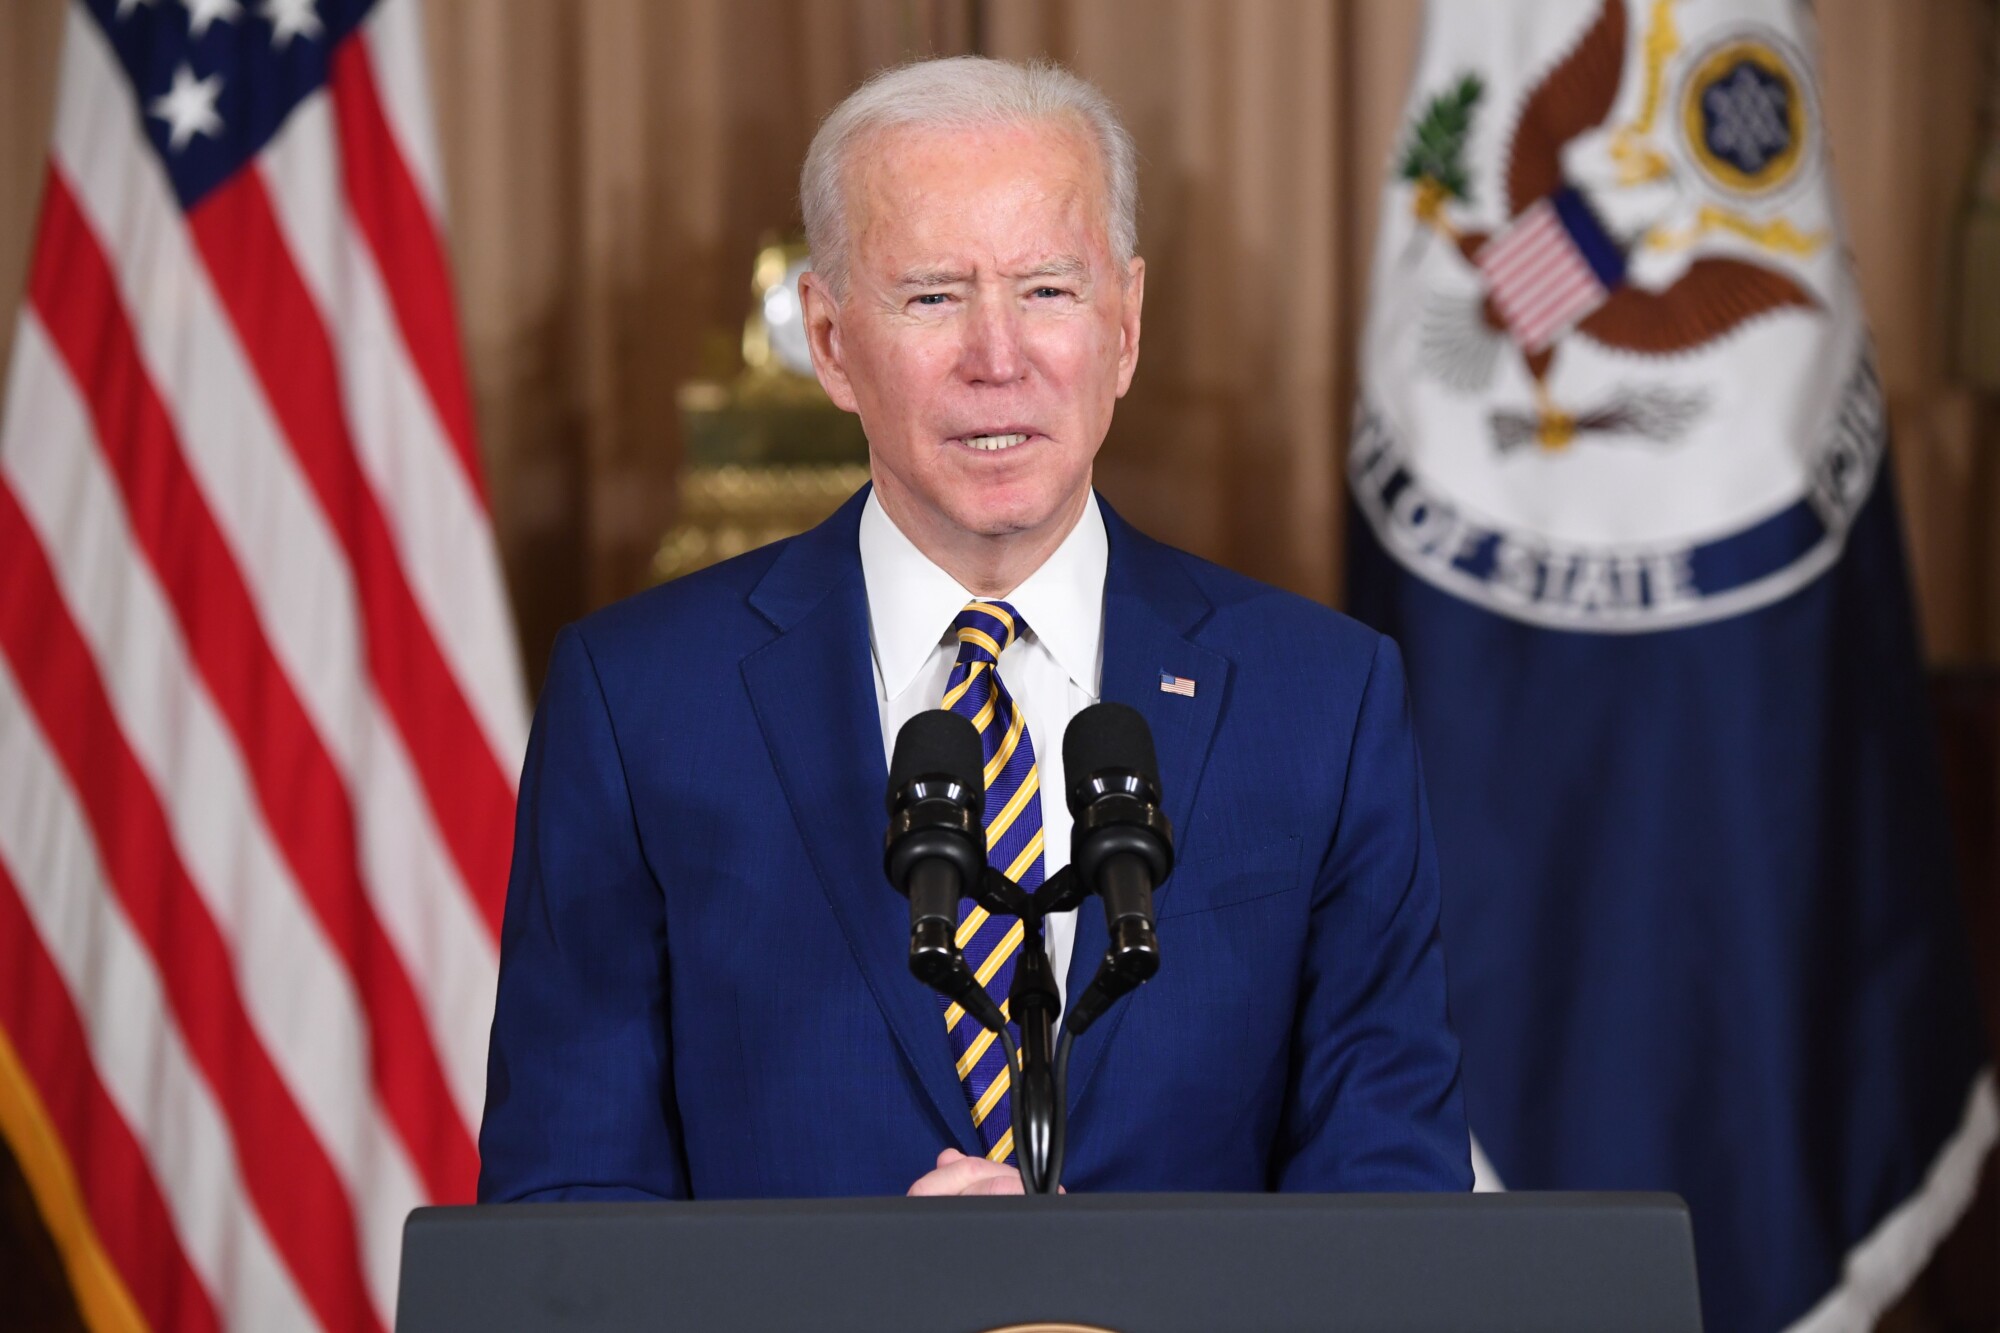 Biden Says US to Focus on ‘Diplomatic’ Approach, in First Major Foreign Policy Speech